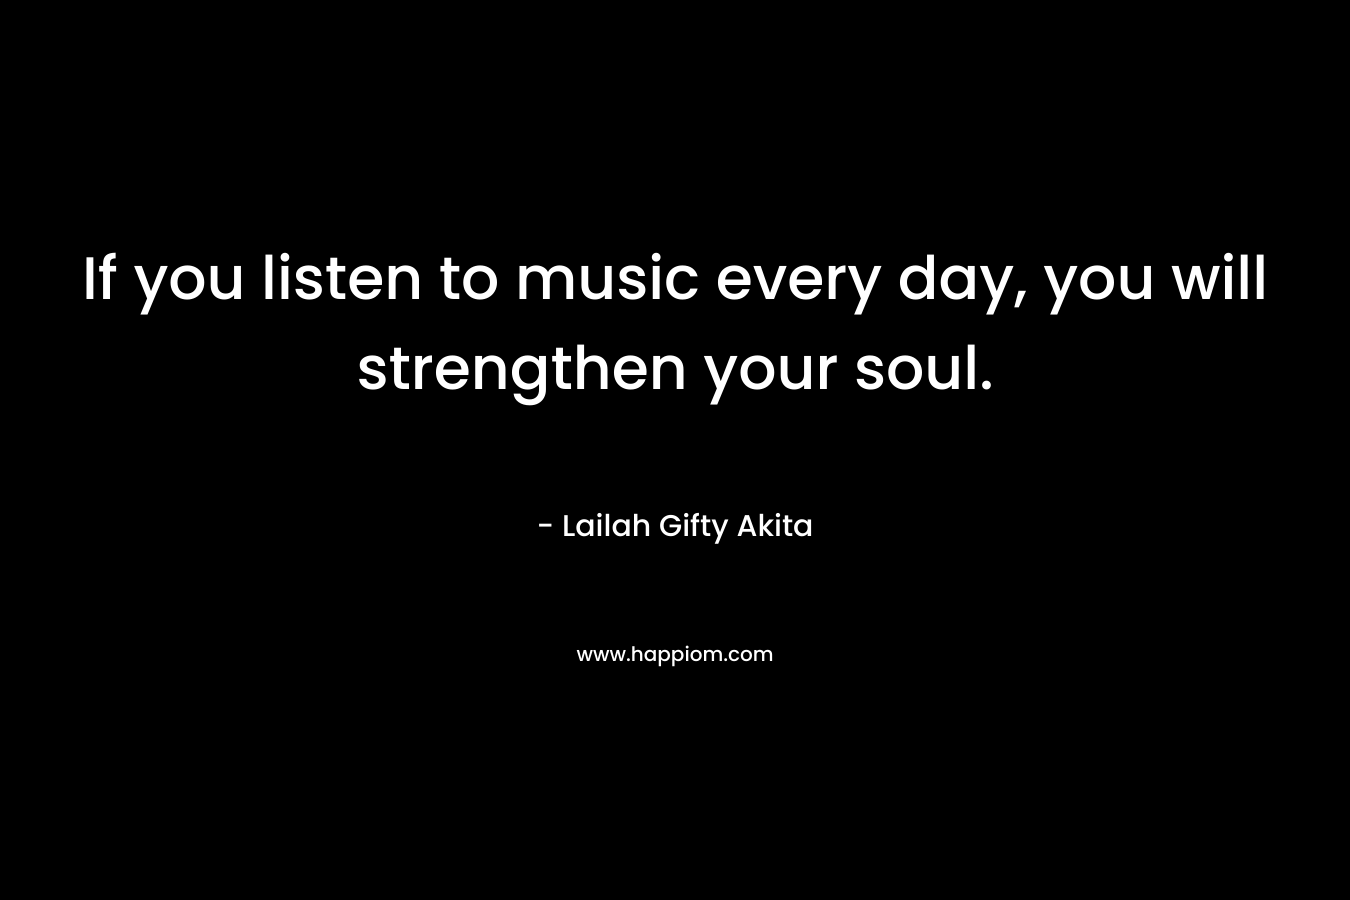 If you listen to music every day, you will strengthen your soul.